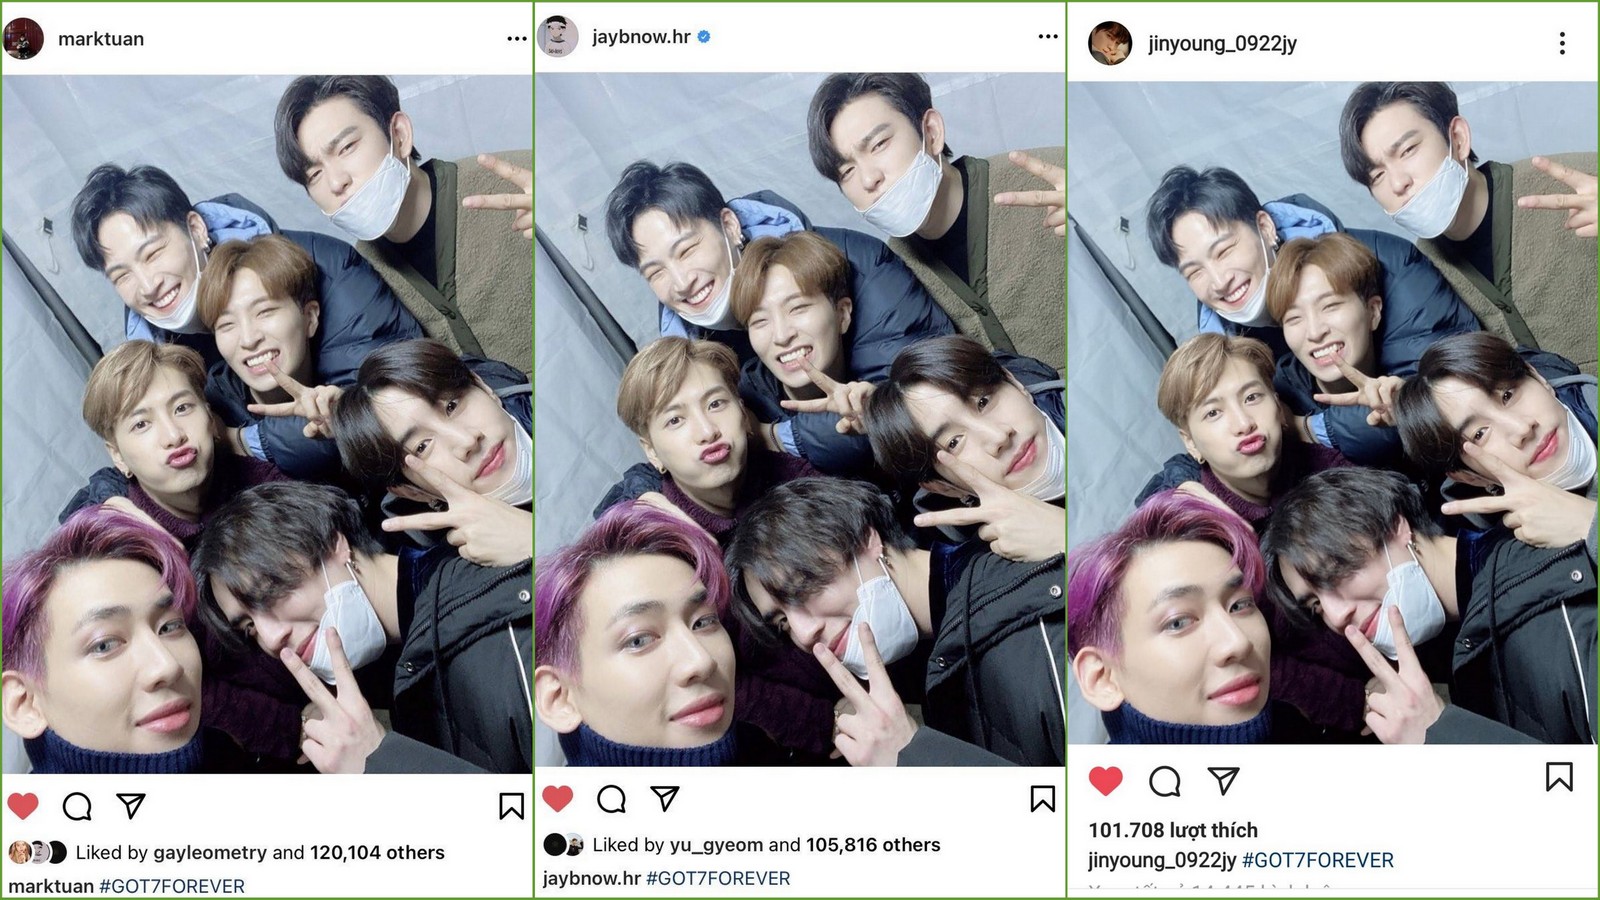 got7-mark-jb-youngjae-yugyeom-bambam-jinyoung-post-got7forever-on-personal-sns-accounts